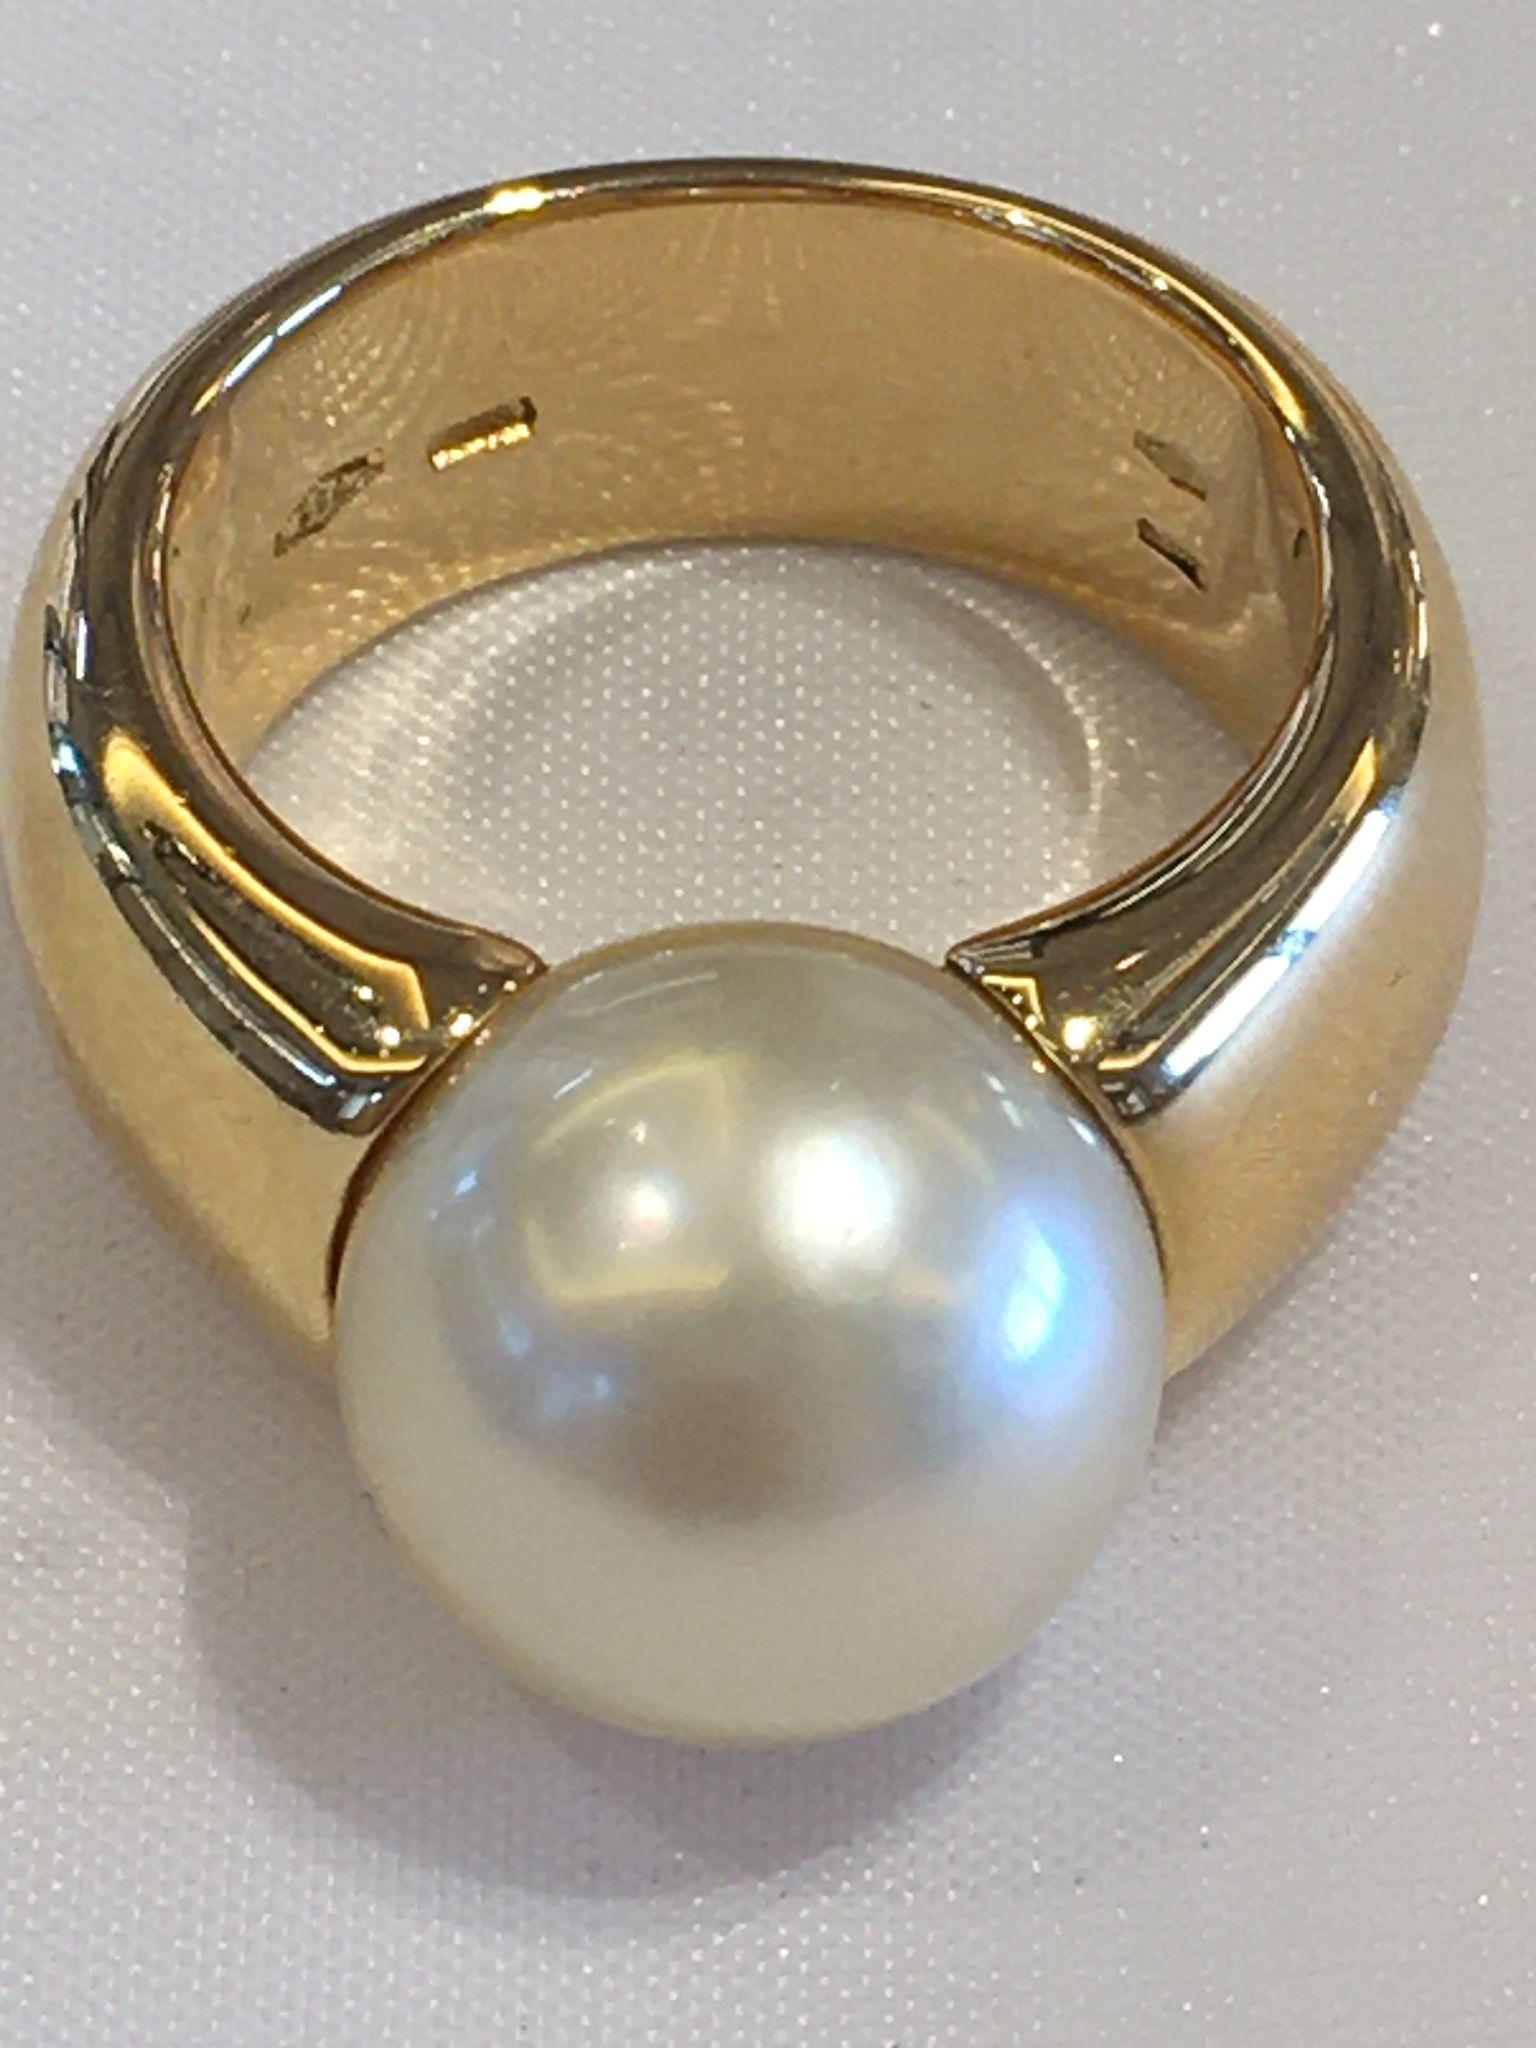 An amazing brush 18kt yellow gold ring with a stunning 5+ Australian light pearl by Mikimoto.
